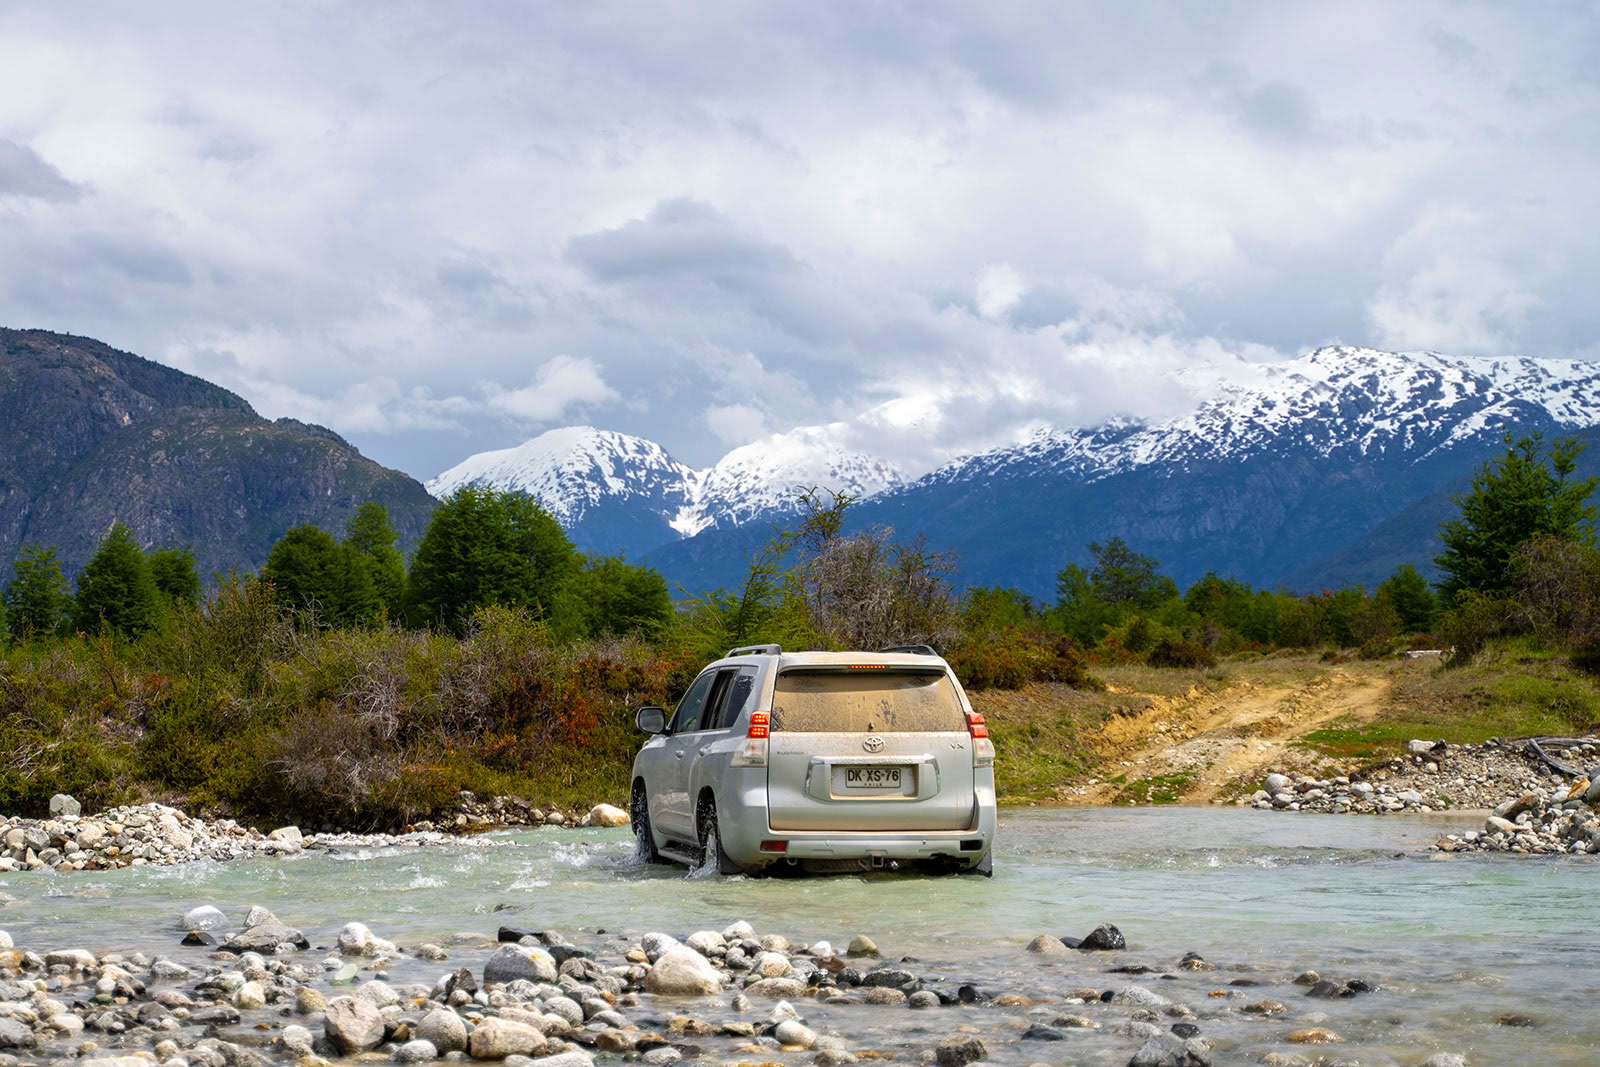 A dirty van drives through a river in Patagonia, Chile